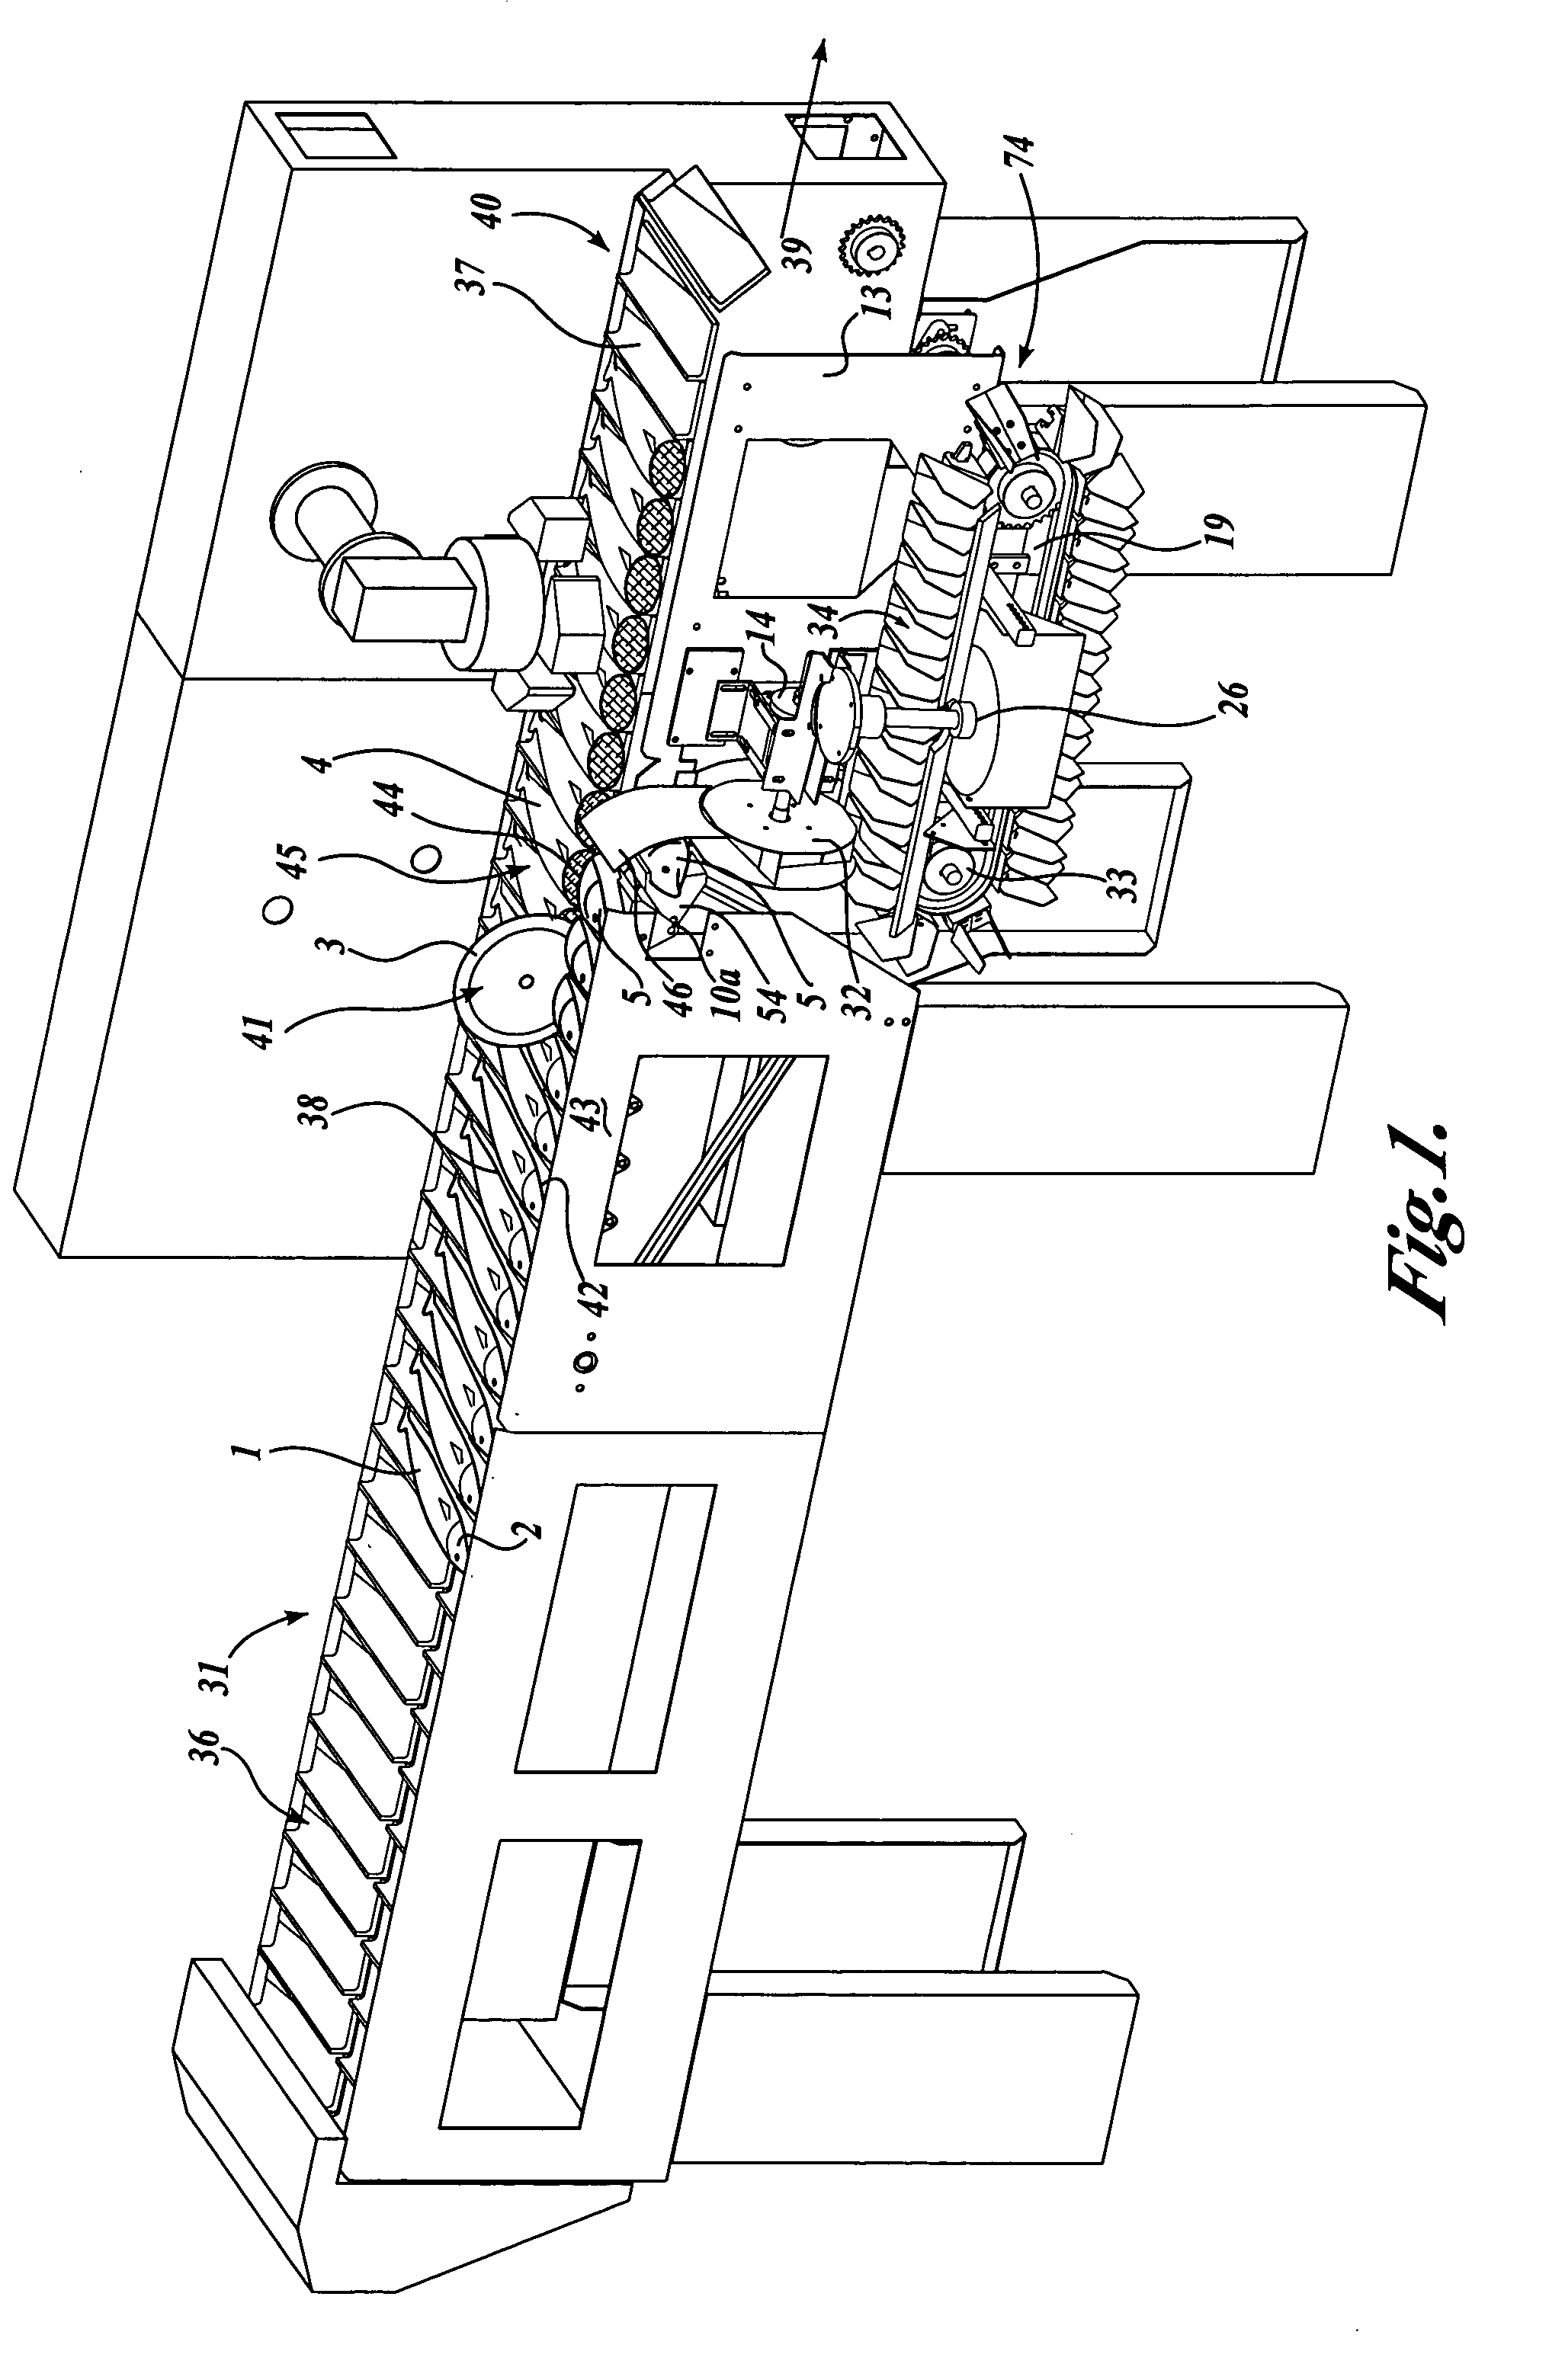 Apparatus and method for recovering neck meat from a fish